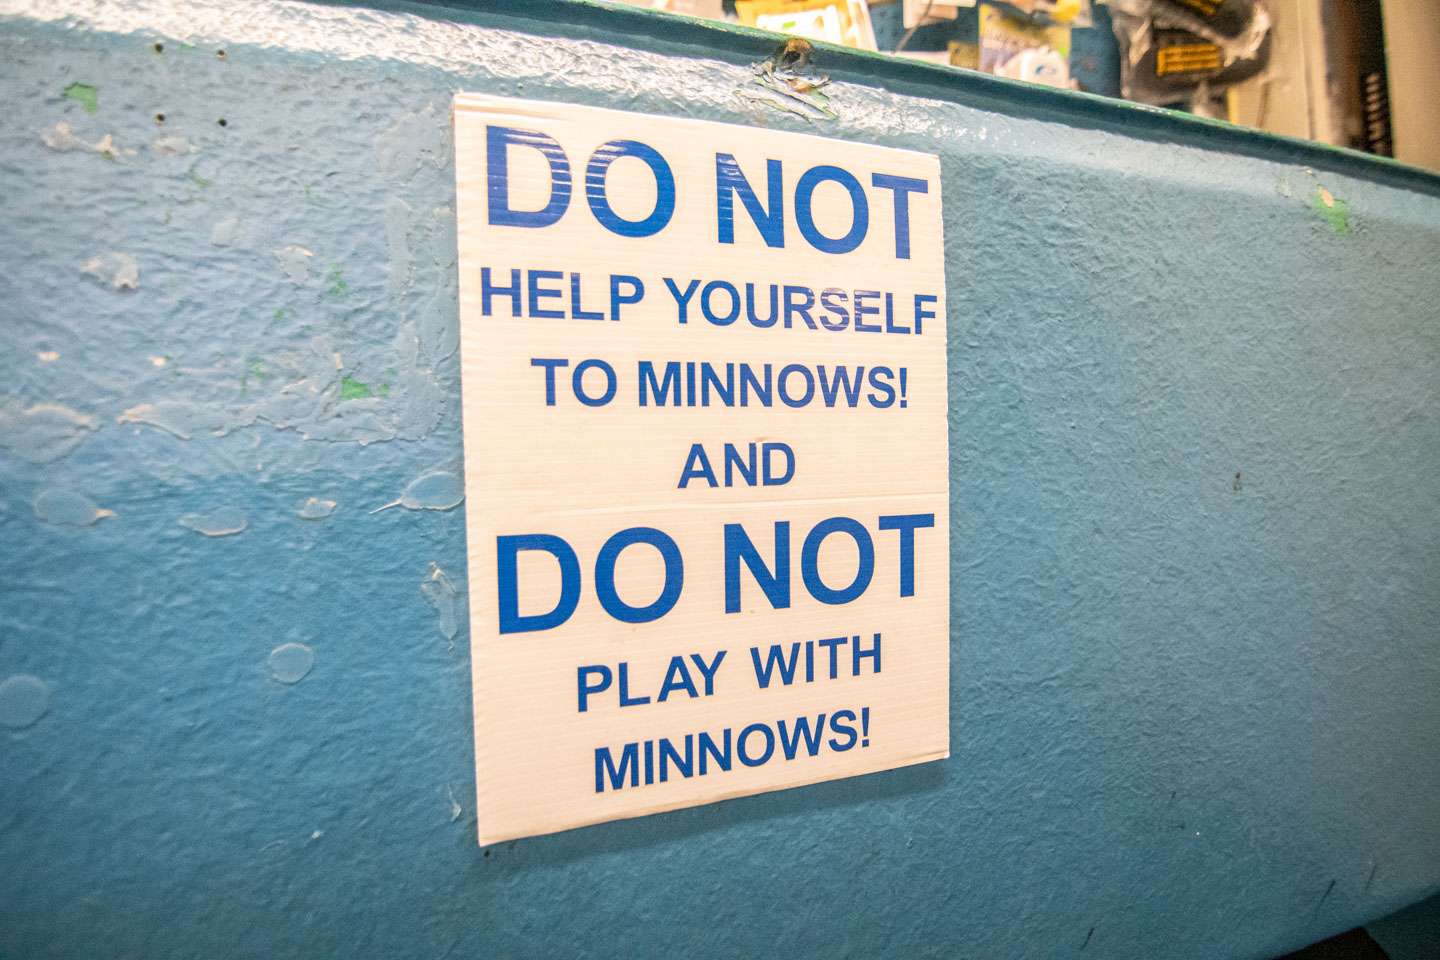 You can get your minnows and live bait at Perkins, but don't help yourself. 